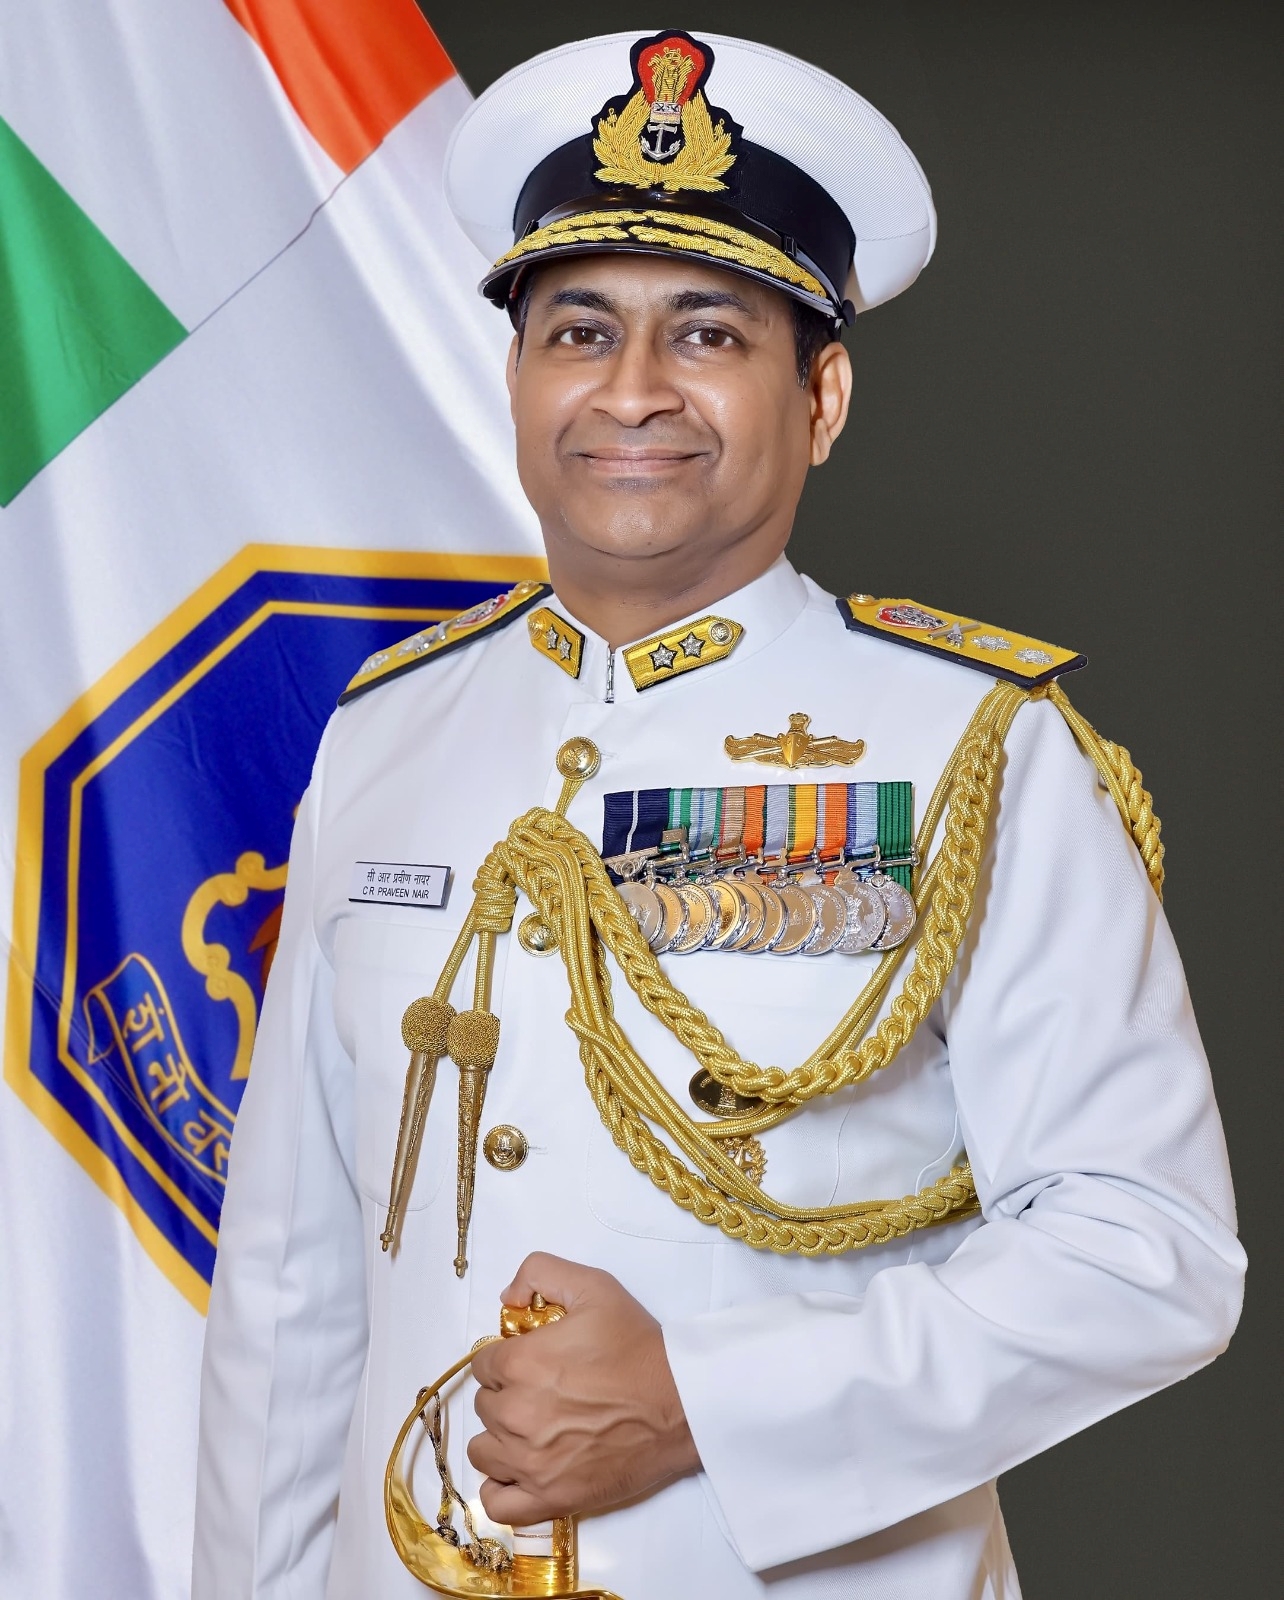 REAR ADMIRAL CR PRAVEEN NAIR TAKES OVER AS FLEET COMMANDER OF THE SWORD ARM